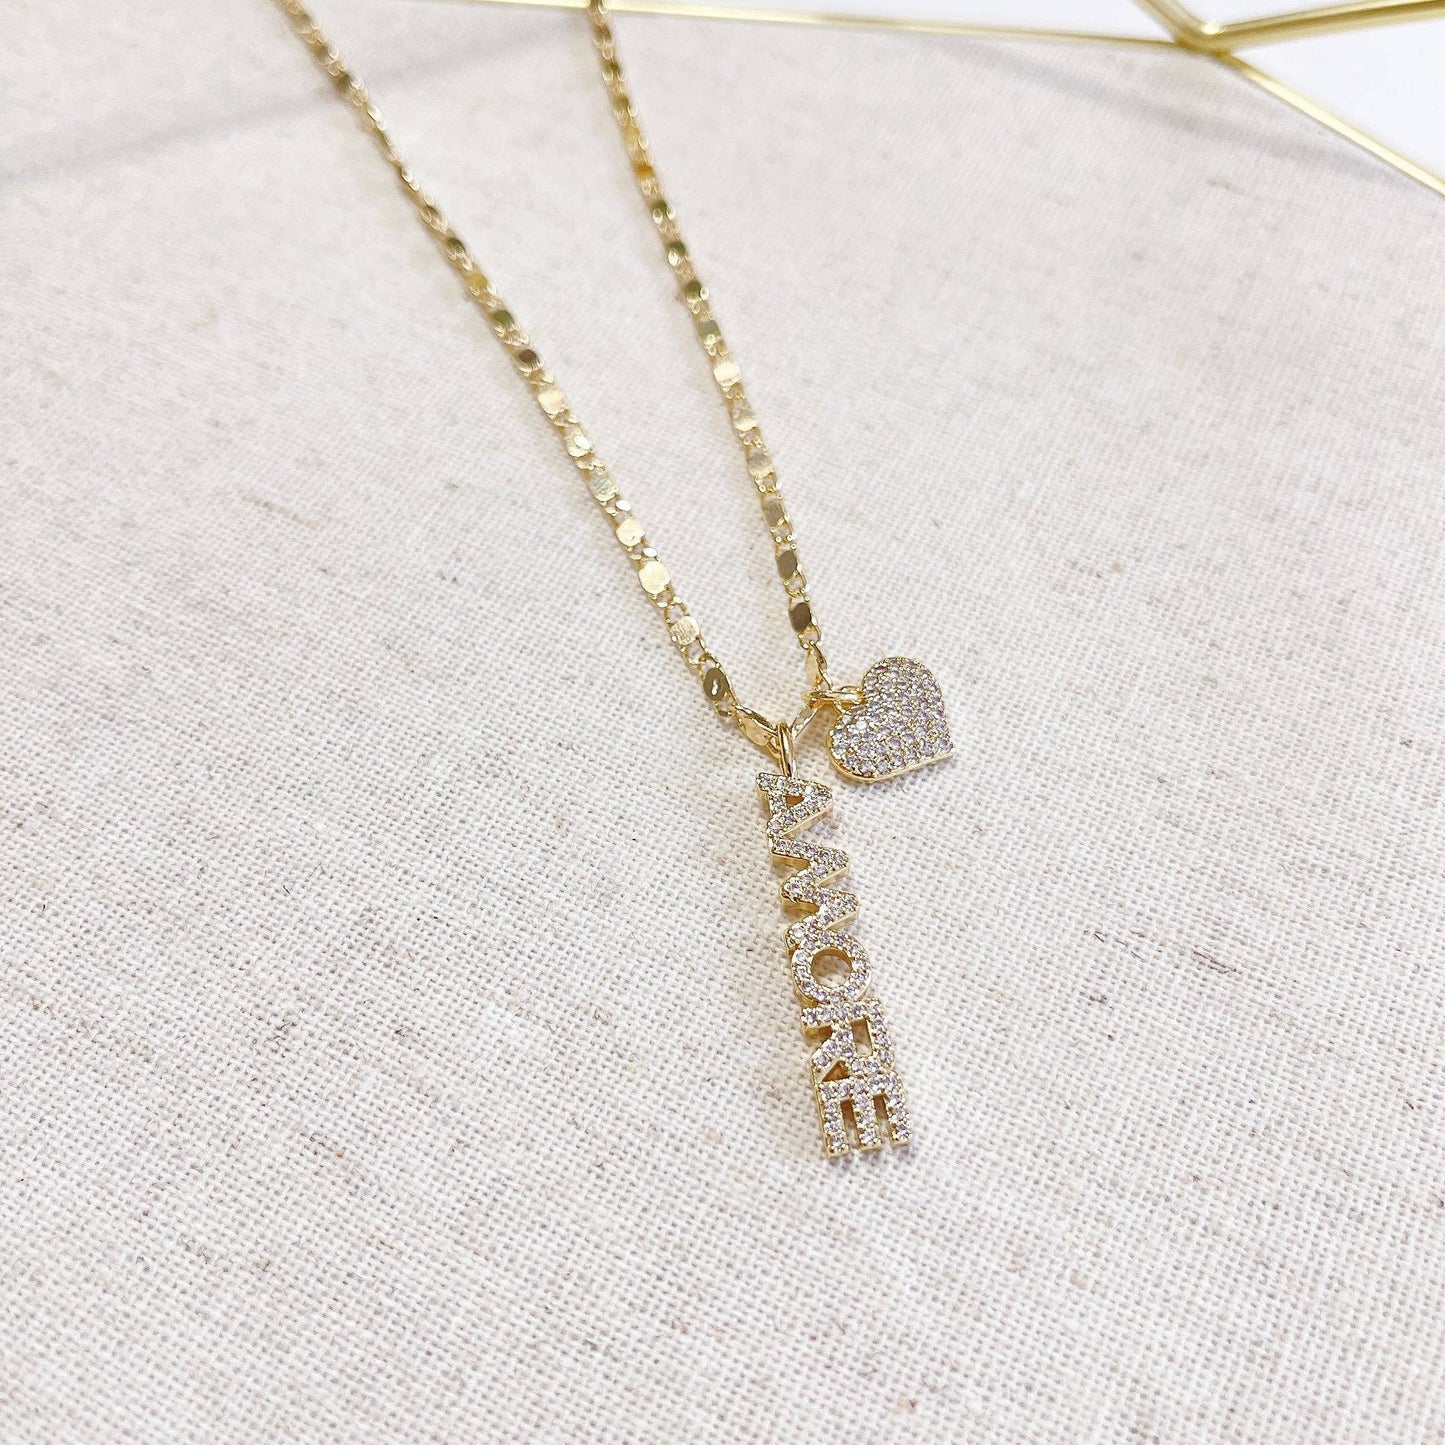 Amore Cuore 14KT Gold-Plated Pendant Necklace